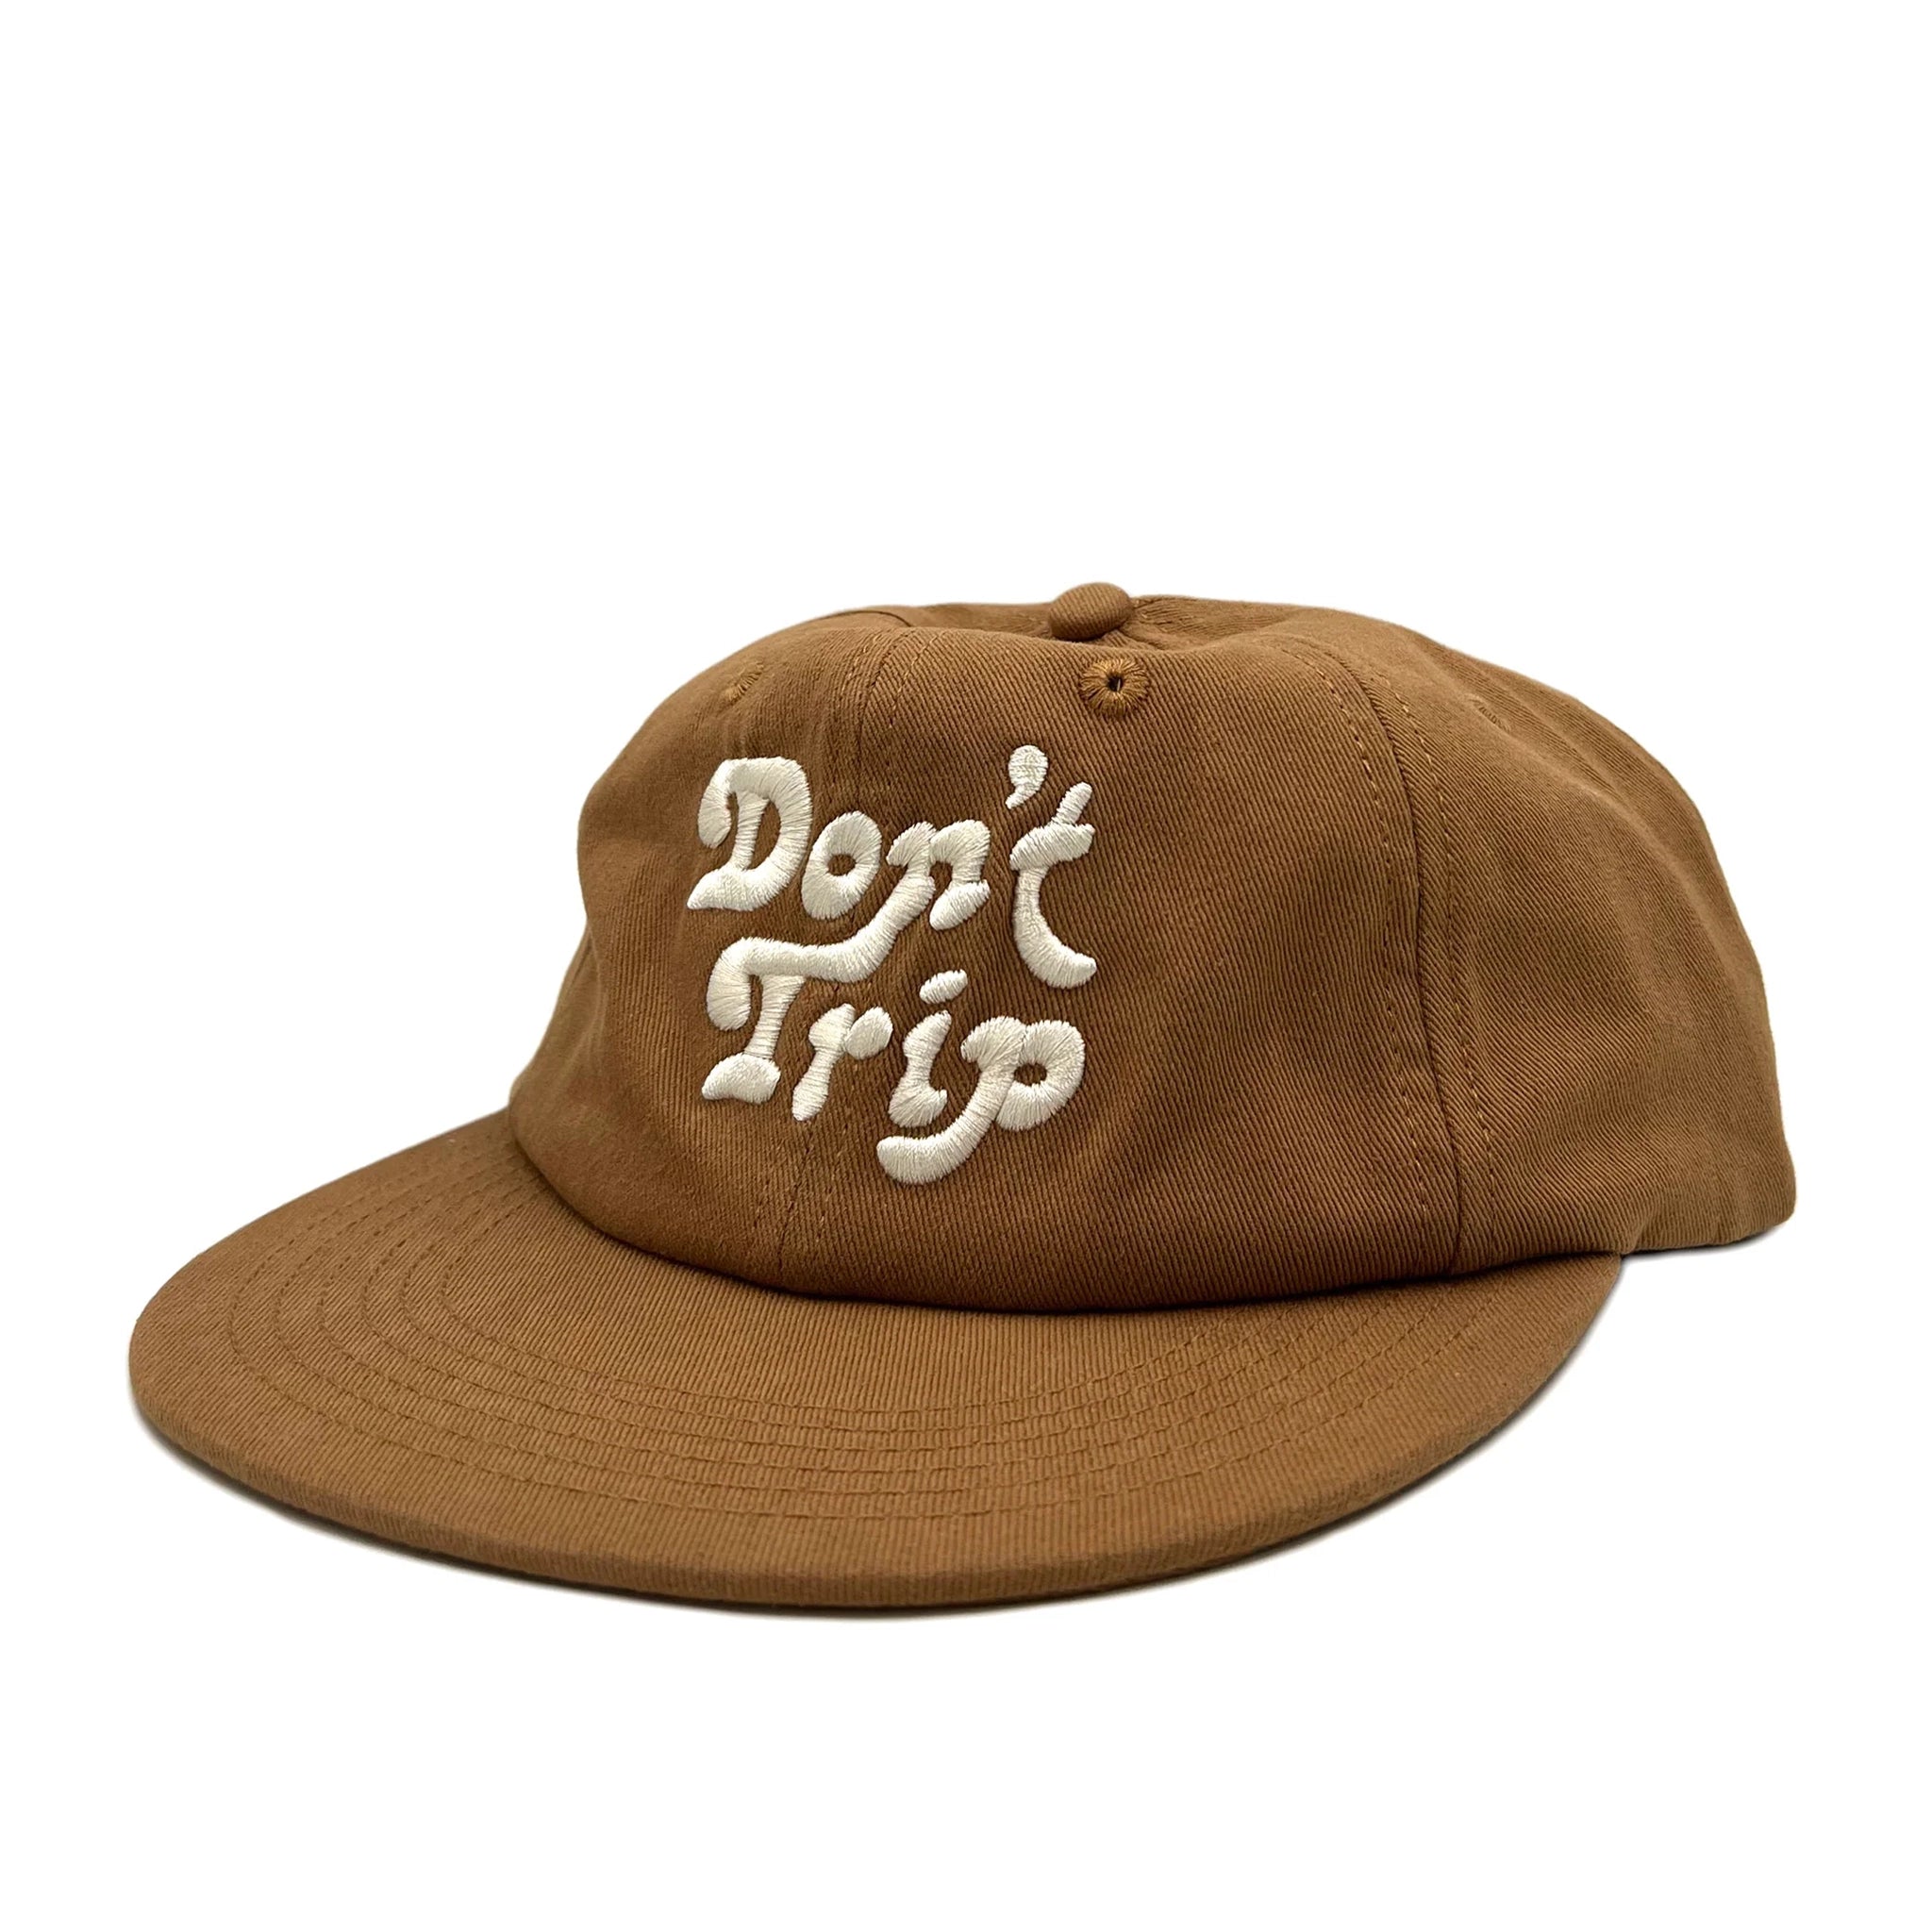 On a white background is a brown unstructured 6 panel baseball hat with white embroidery that reads, &quot;Don&#39;t Trip&quot;.